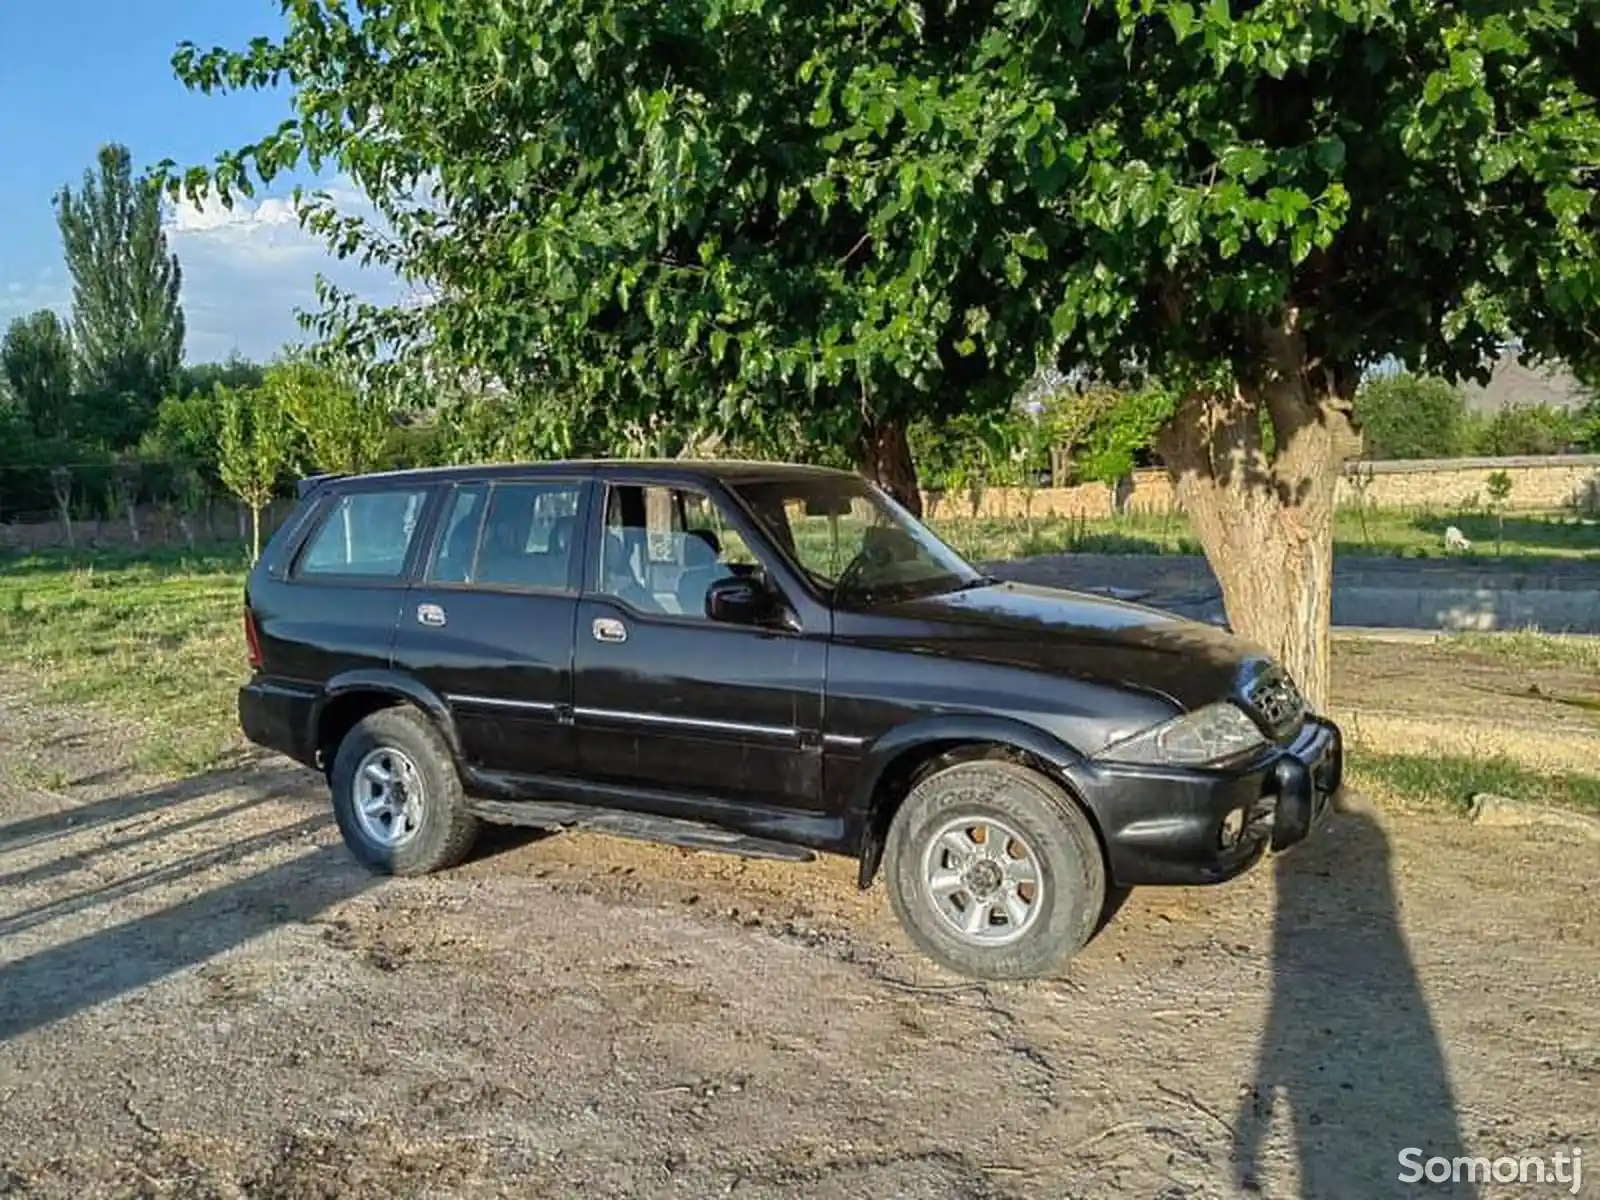 Ssang Yong Musso, 1999-2